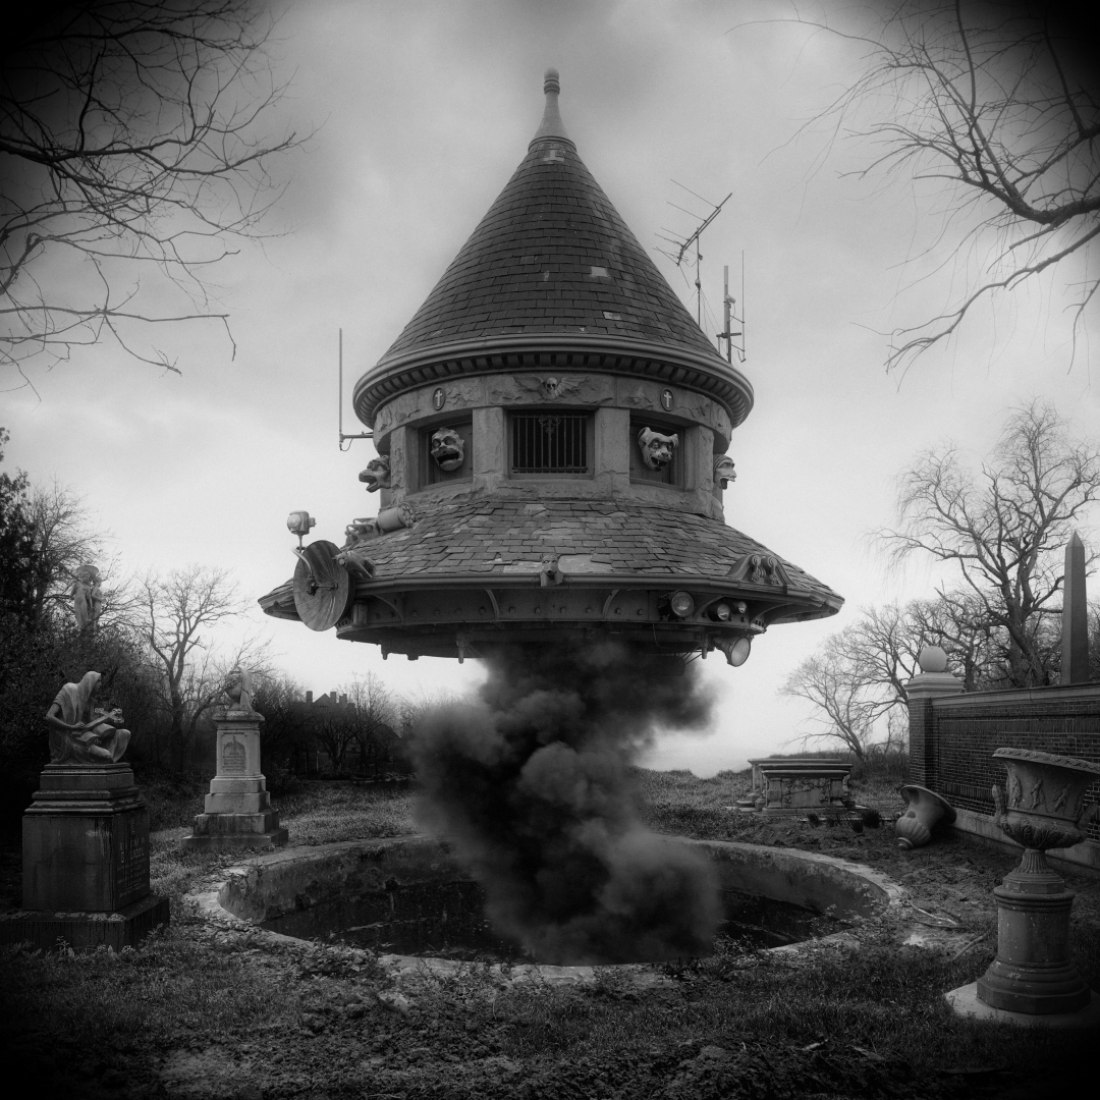 Hyper-Collage by Jim Kazanjian. Image © courtesy of the author.